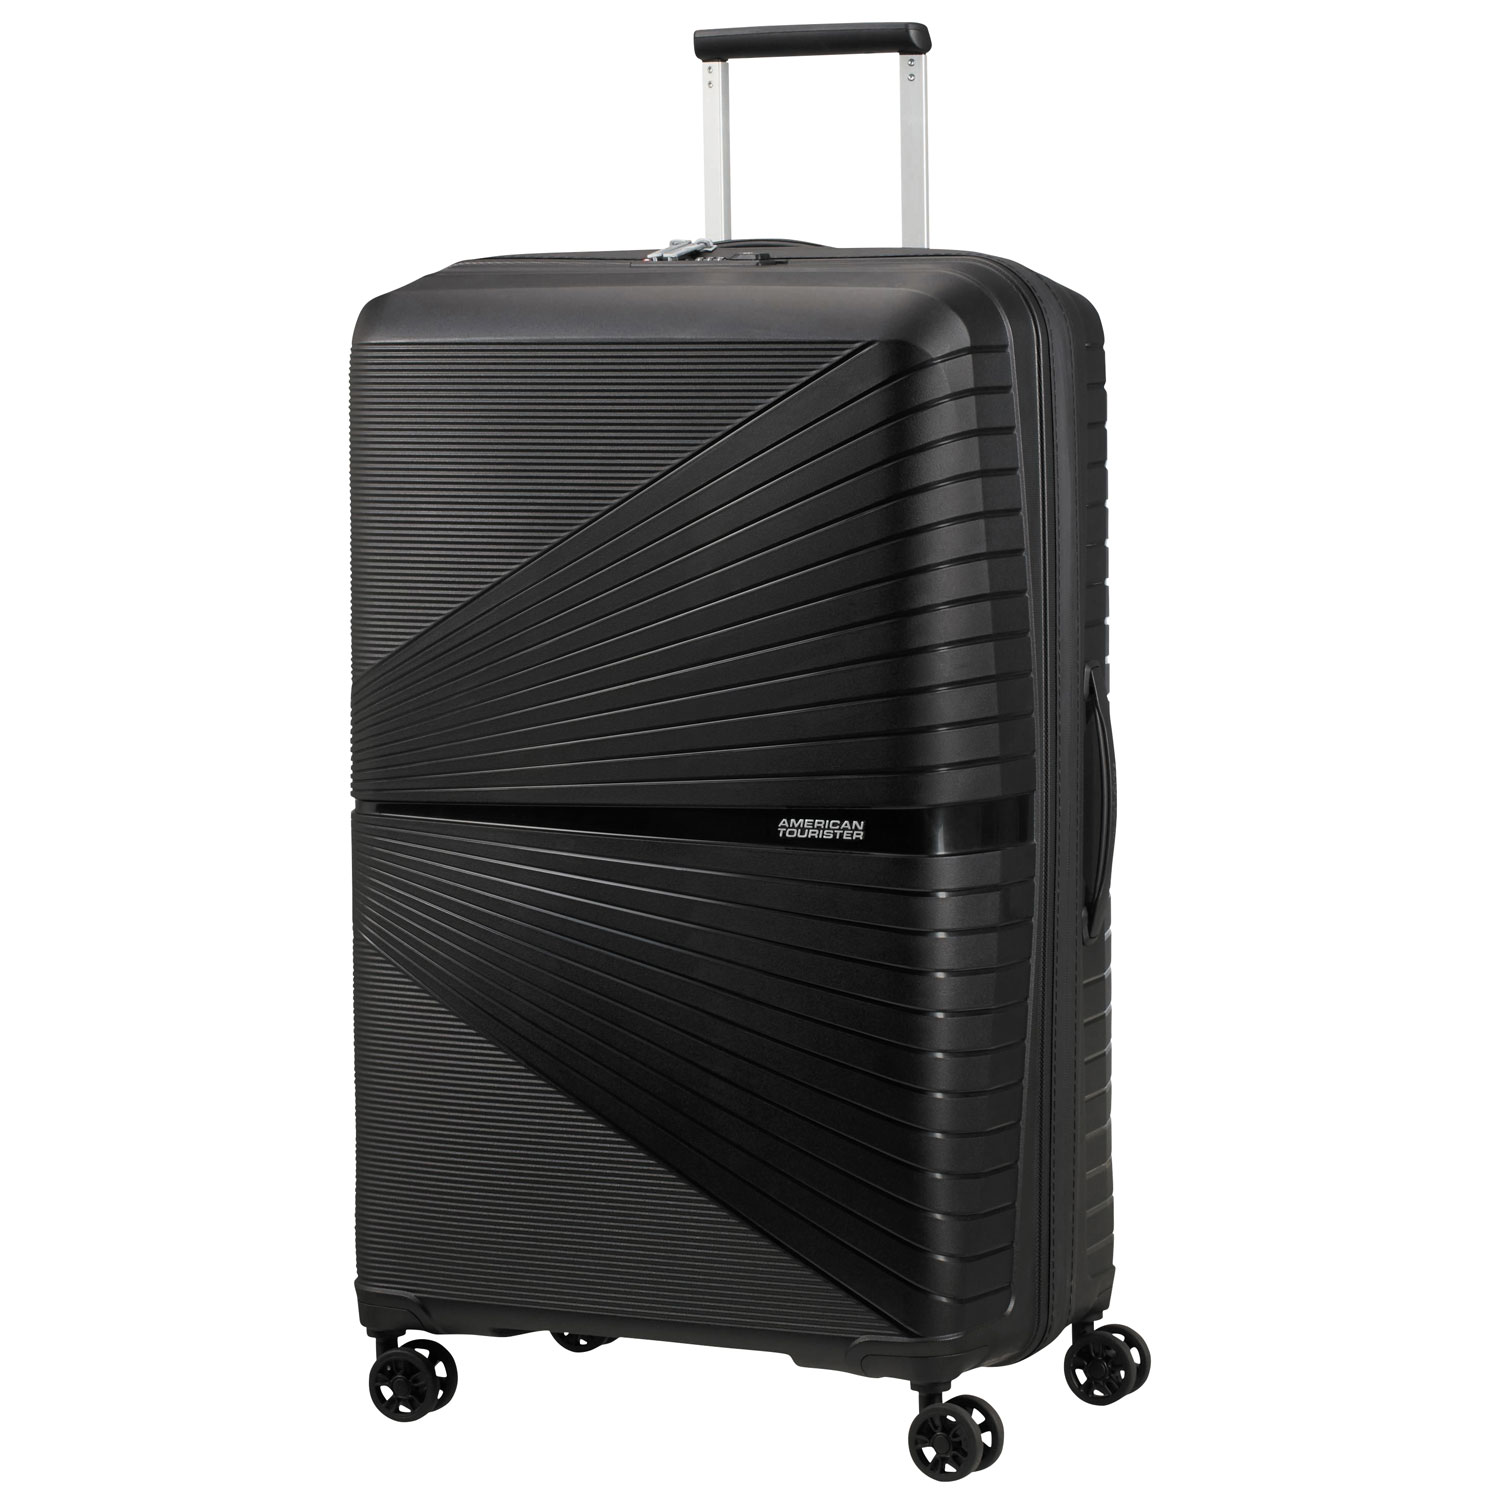 American Tourister Airconic 28" Hard Side Carry-On Luggage - Onyx Black